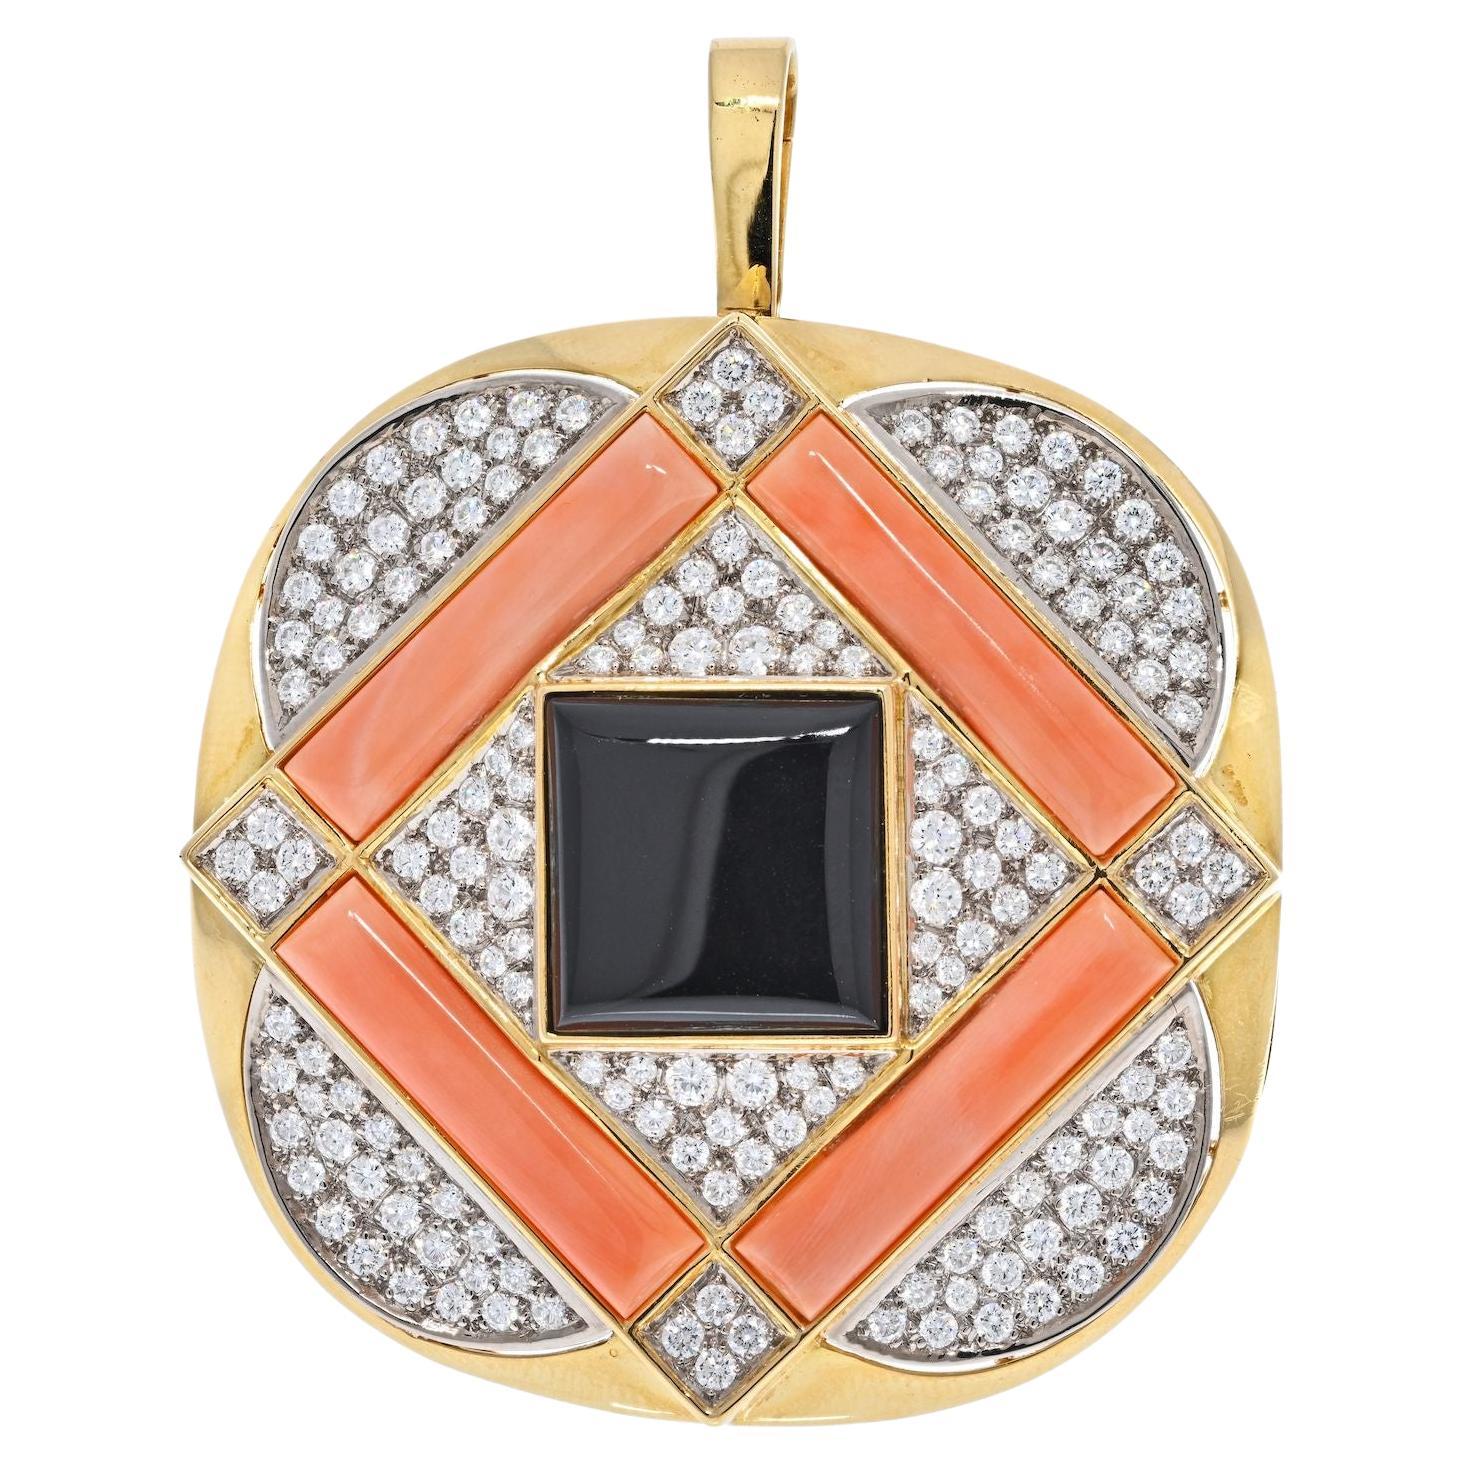 Vacheron Constantin 18K Yellow Gold 1970's Coral, Diamond And Onyx Pendant Brooch For Sale